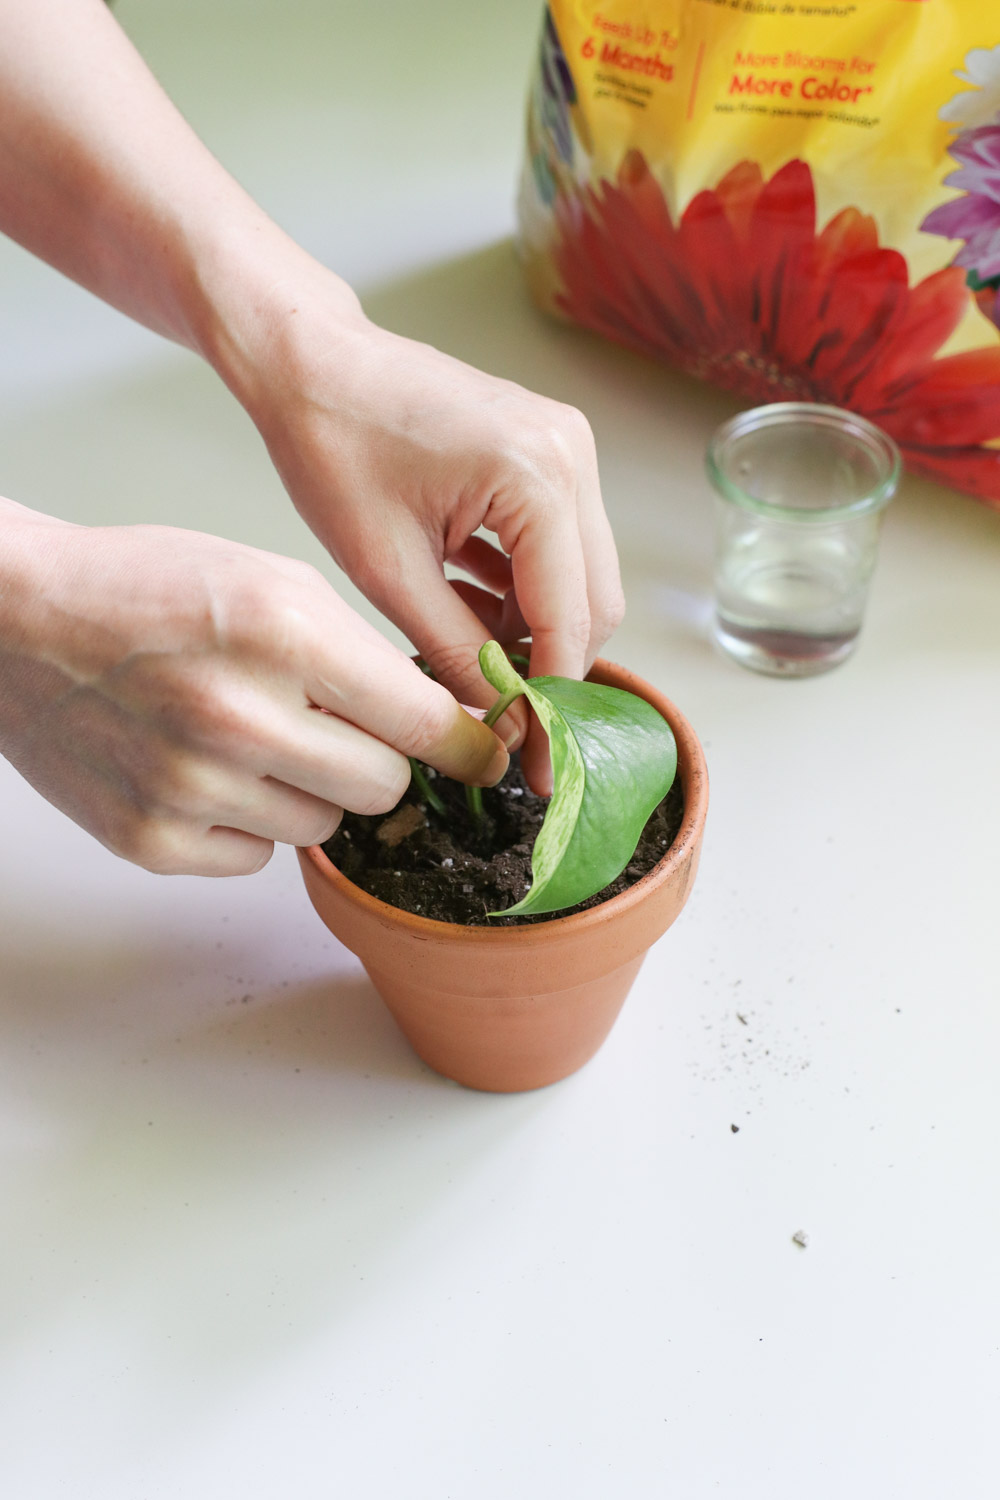 Planting a Cutting in Potting Soil